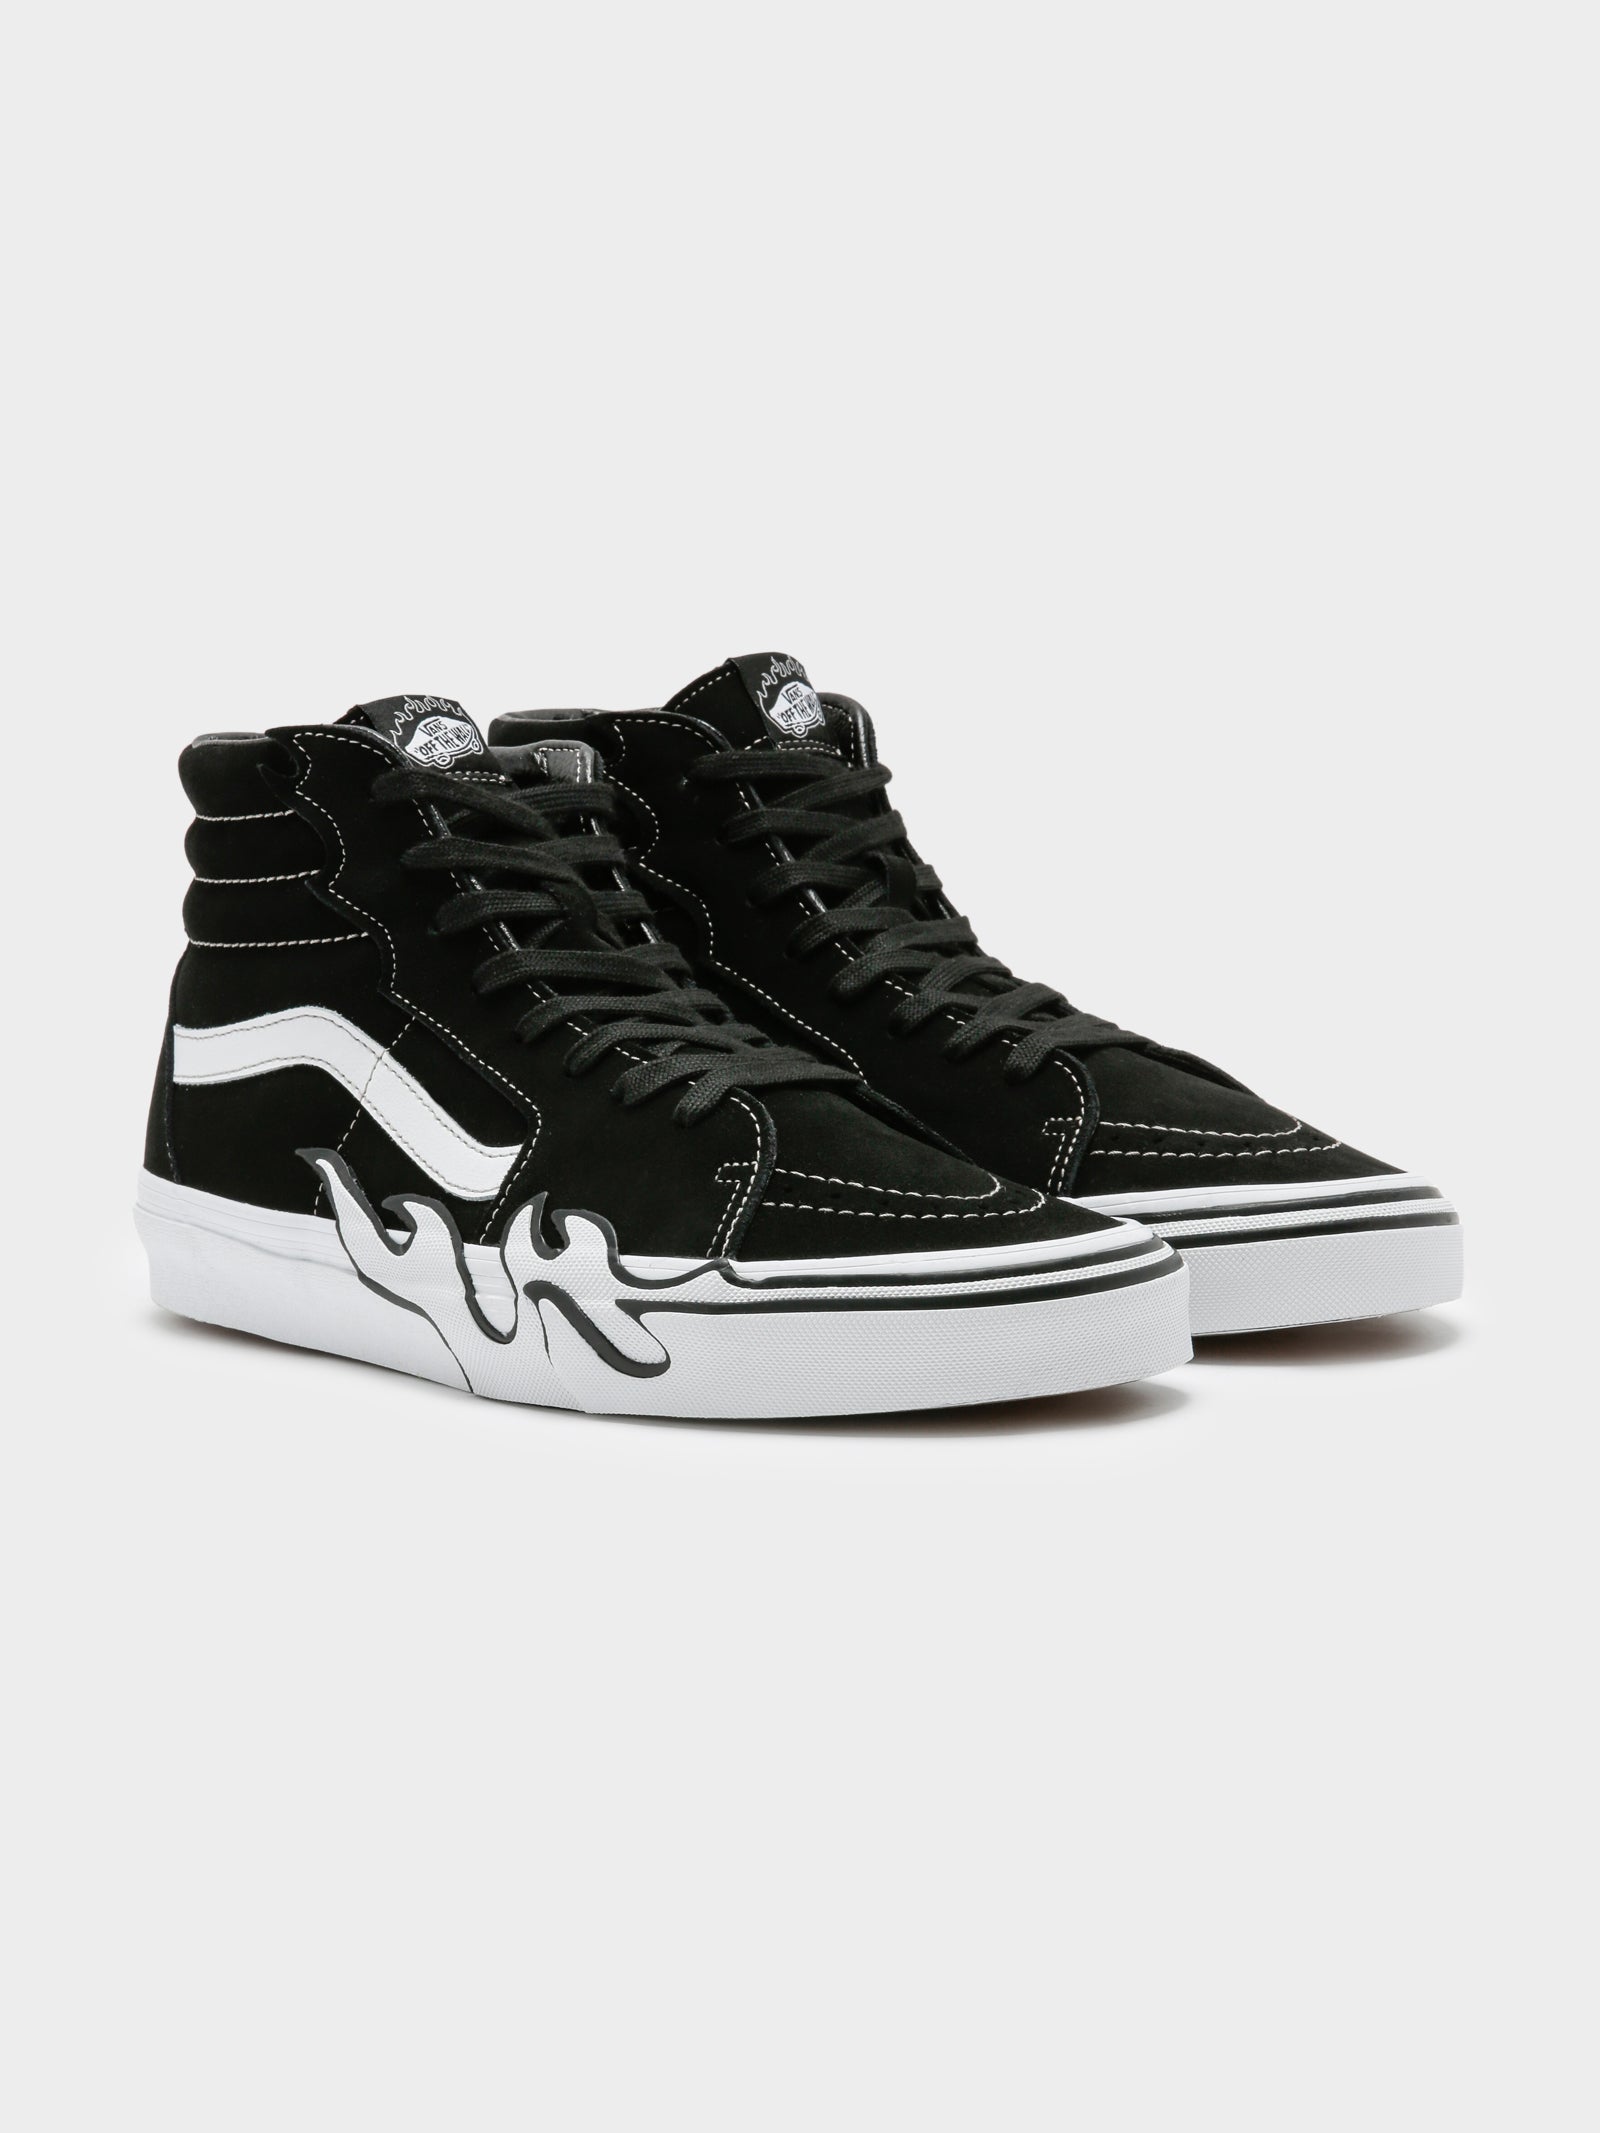 Unisex Sk8 High Flame Suede Sneakers in Black & White